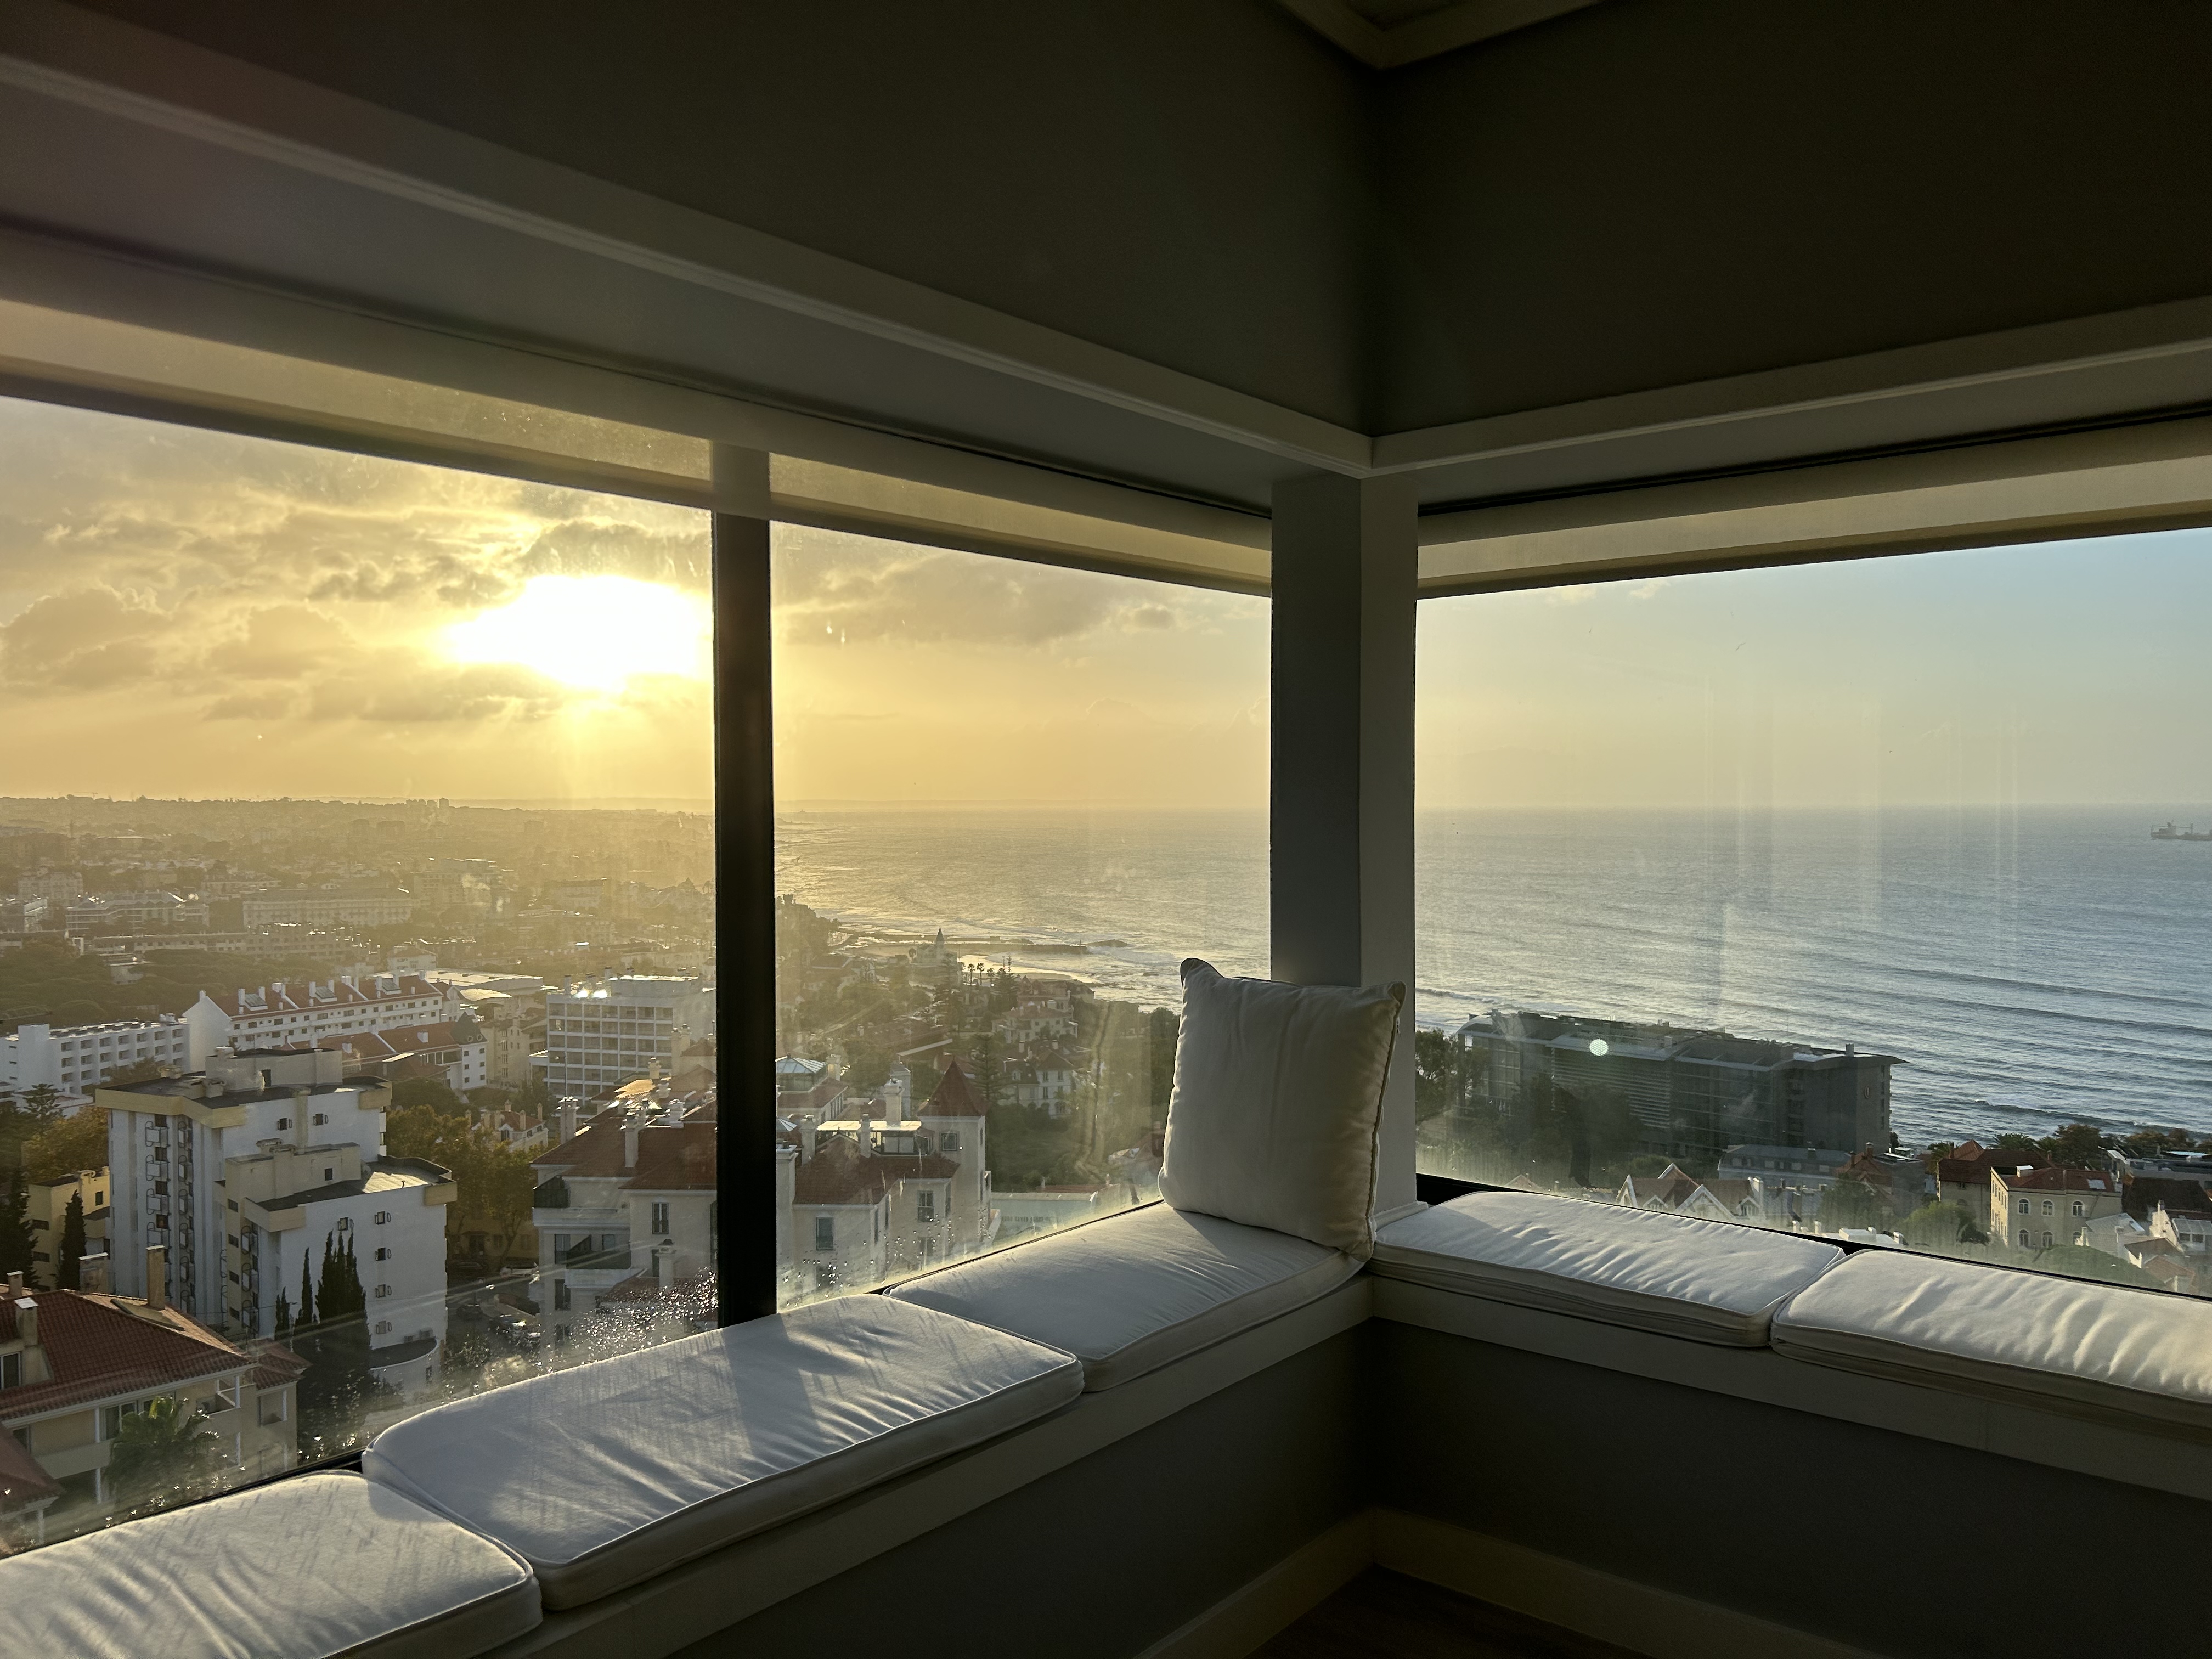 Morning view from a high-rise building's corner window seat, with the sun rising above a coastal cityscape. Sunlight streams through the clouds, casting a soft glow over the sea and illuminating the city. The calm ocean extends to the horizon under a sky graced with the early light of day.